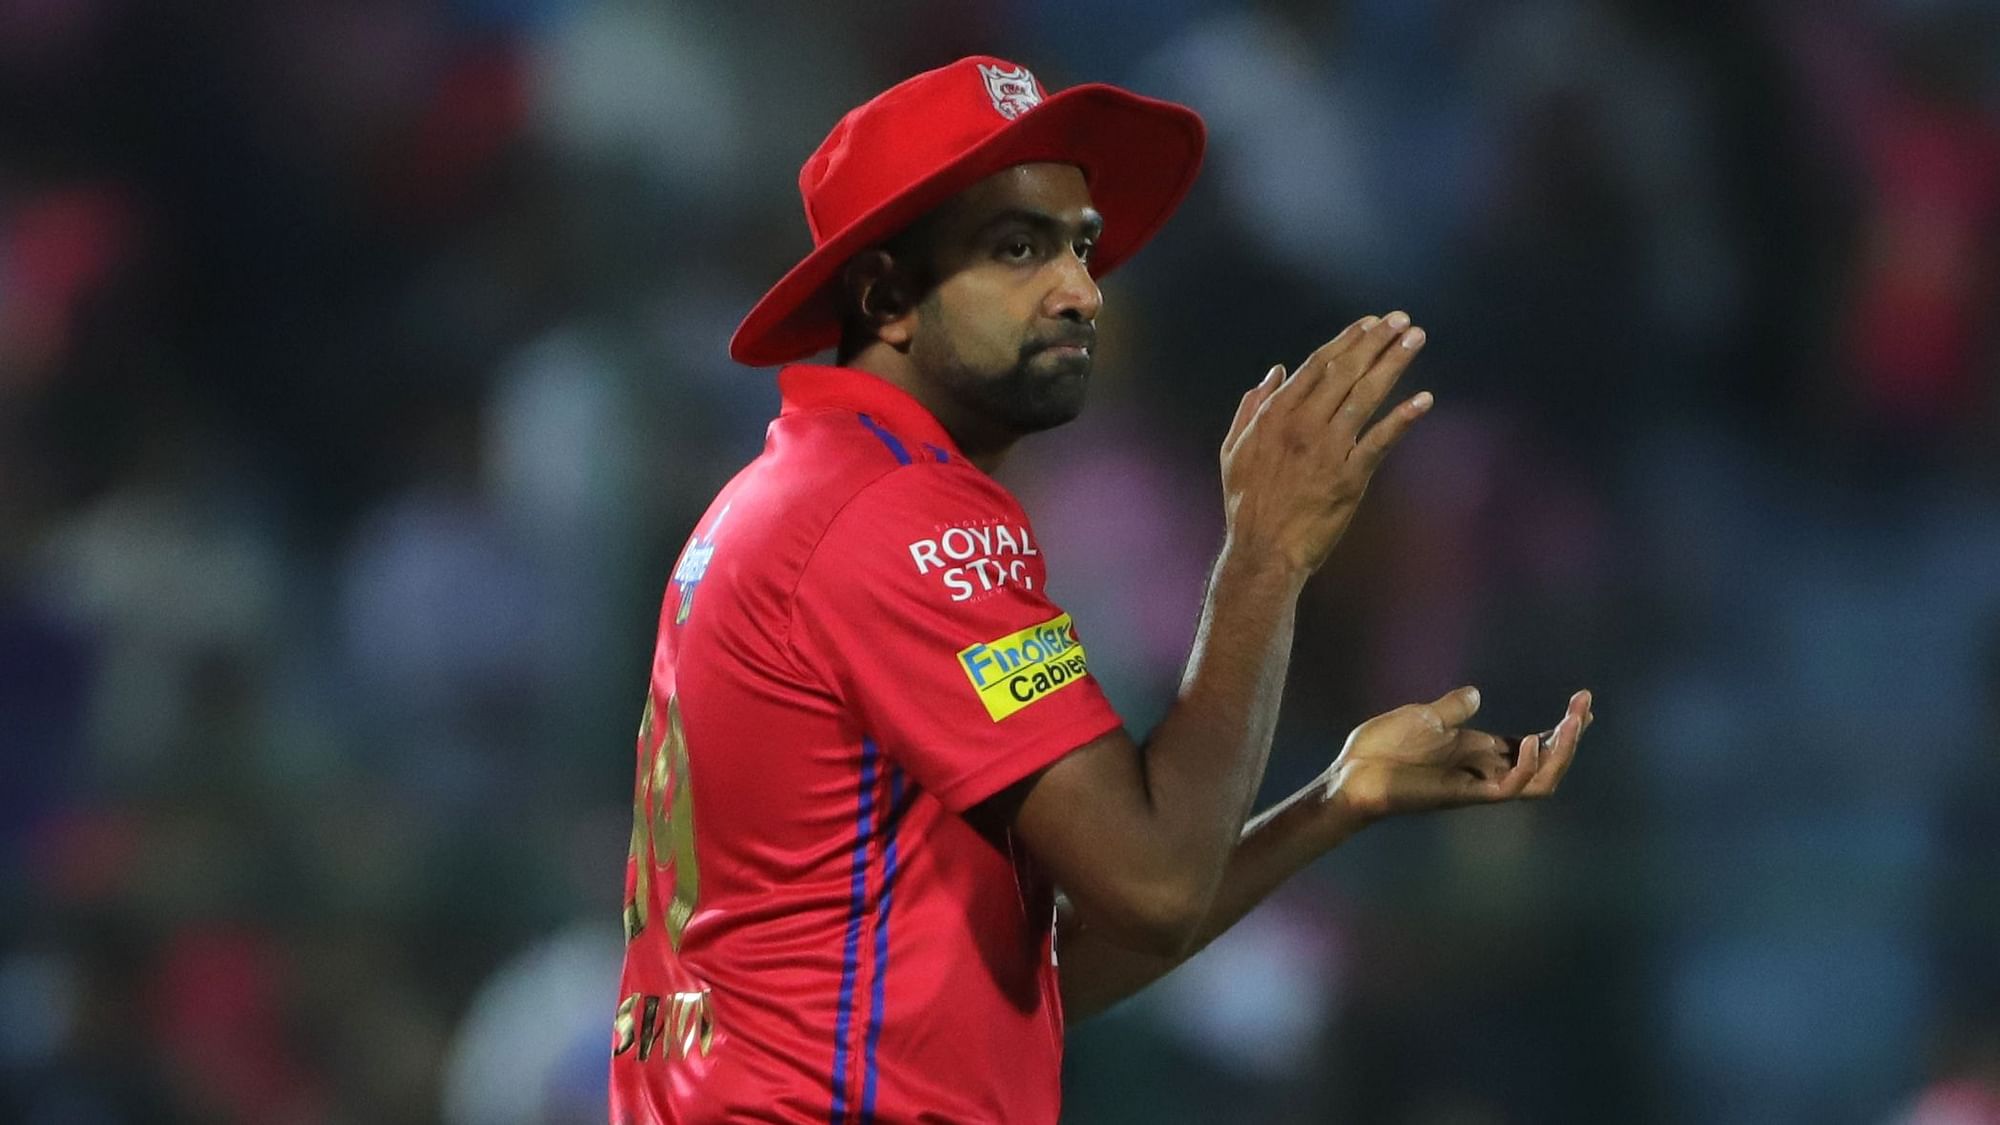 “There is nothing to defend,” Ashwin said about the Mankading incident.